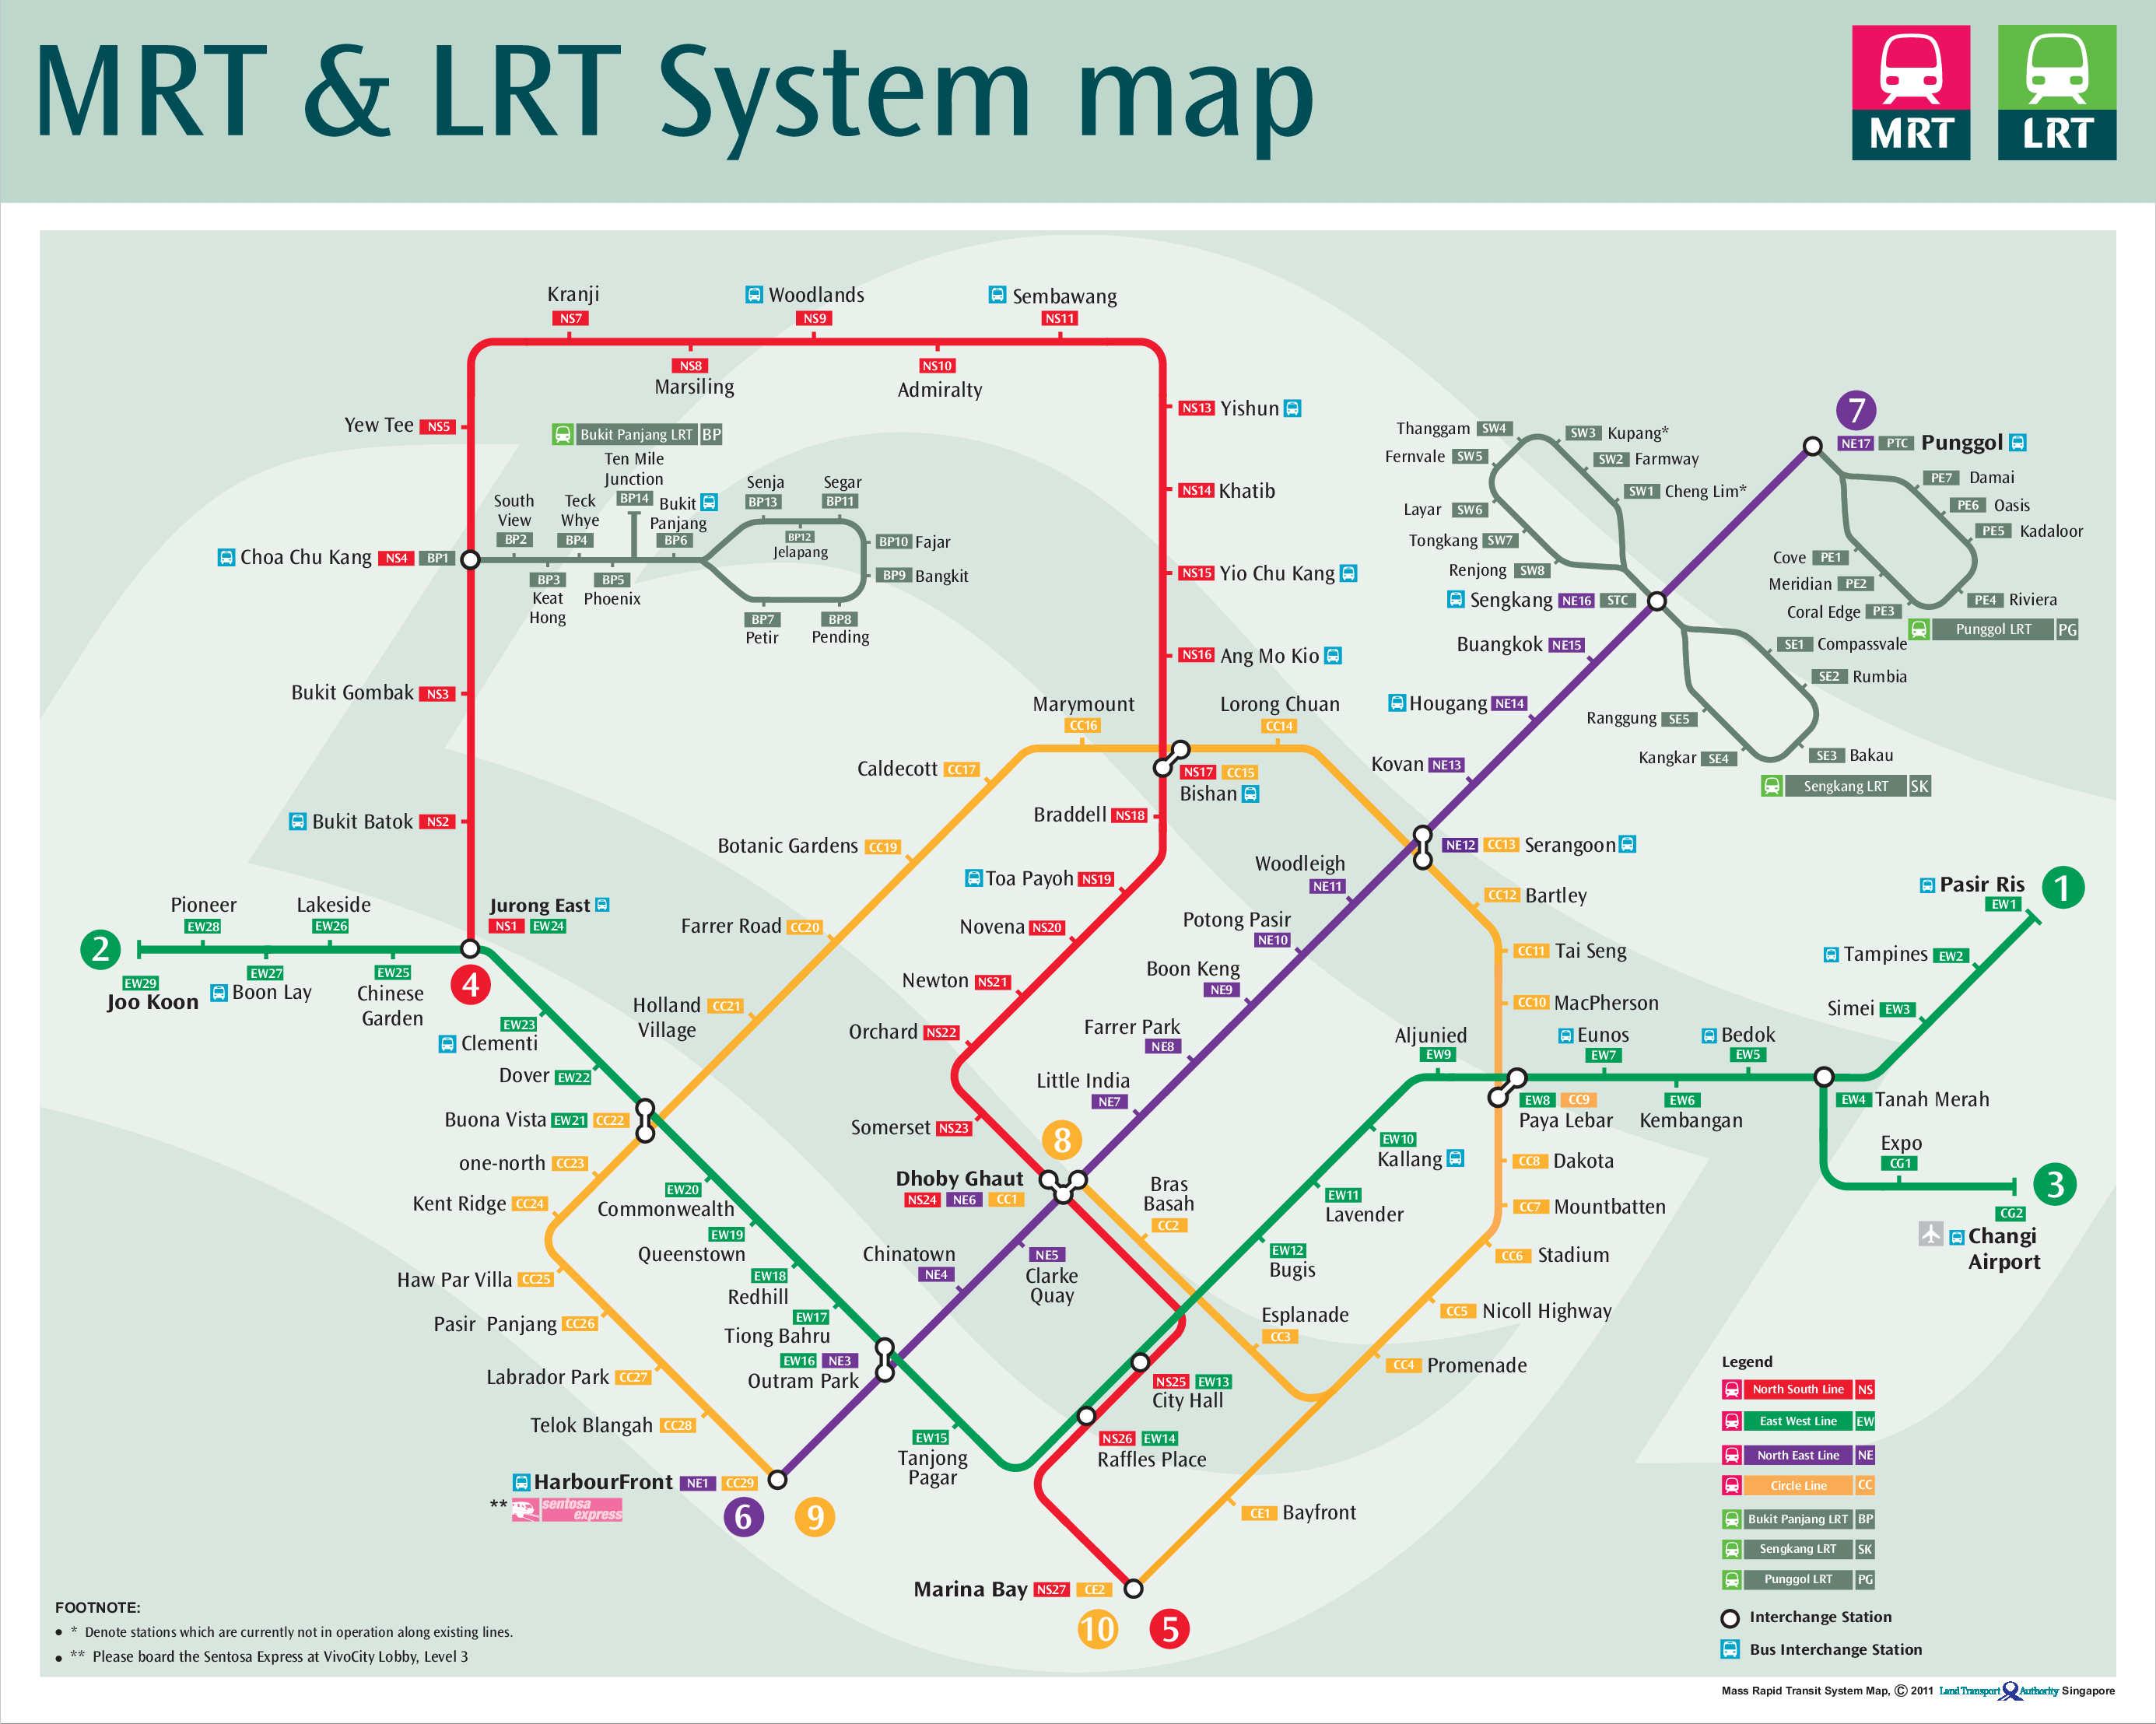 MRT map from 2011